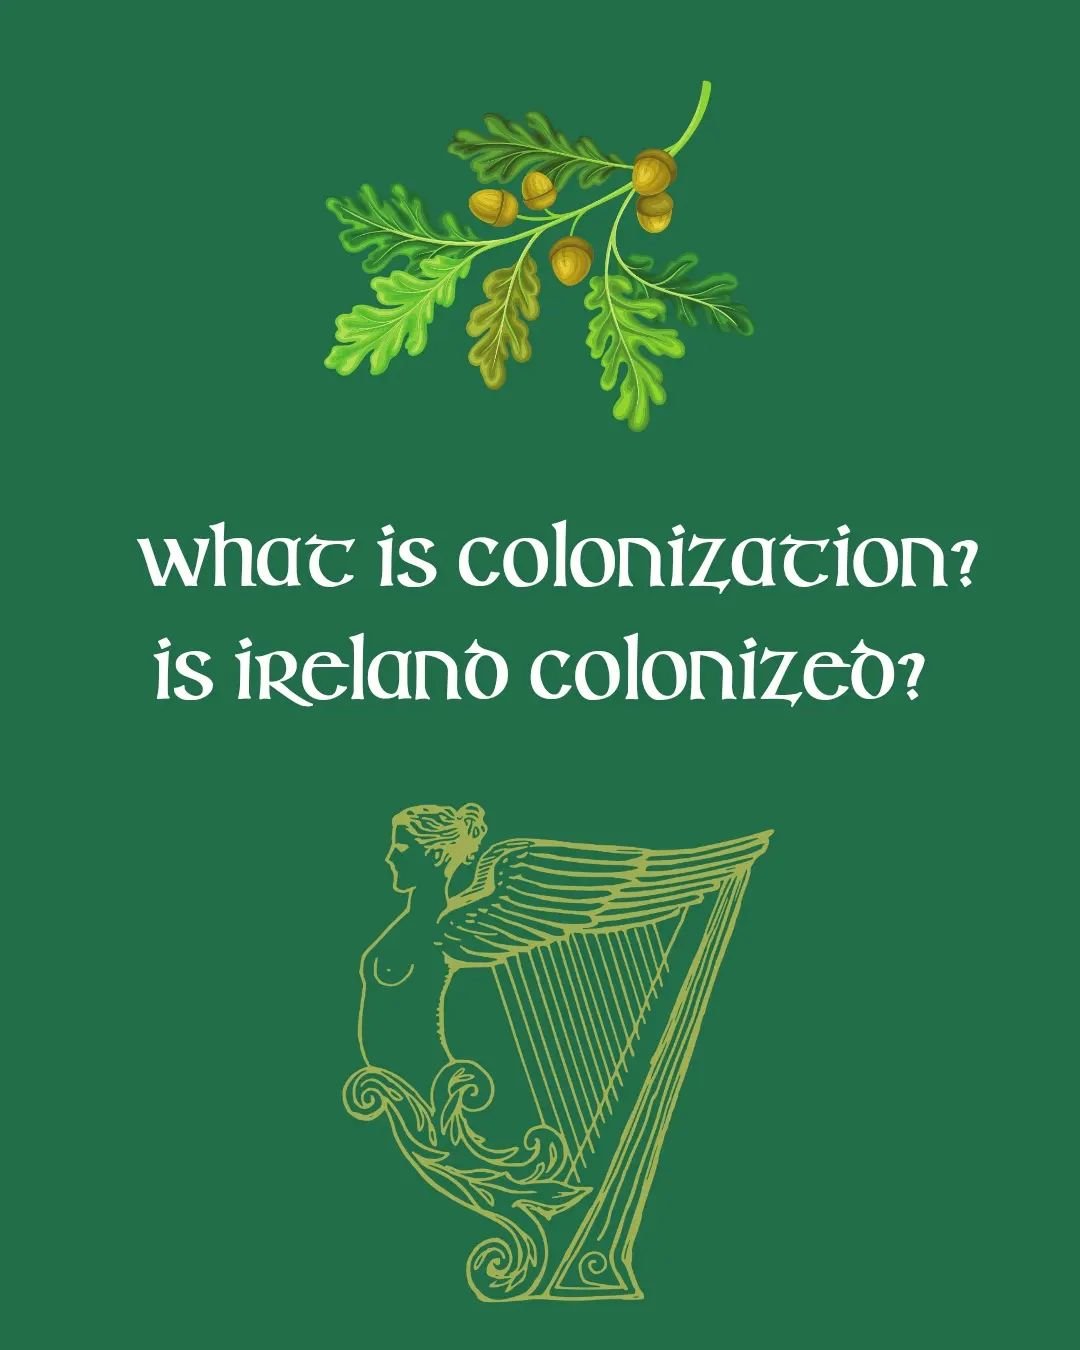 What is colonization? Is Ireland colonized? 

Colonisation is the act of a people establishing themselves in a place which is already inhabited by people native to that land or territory. This is often done forcefully, land is taken, and other method